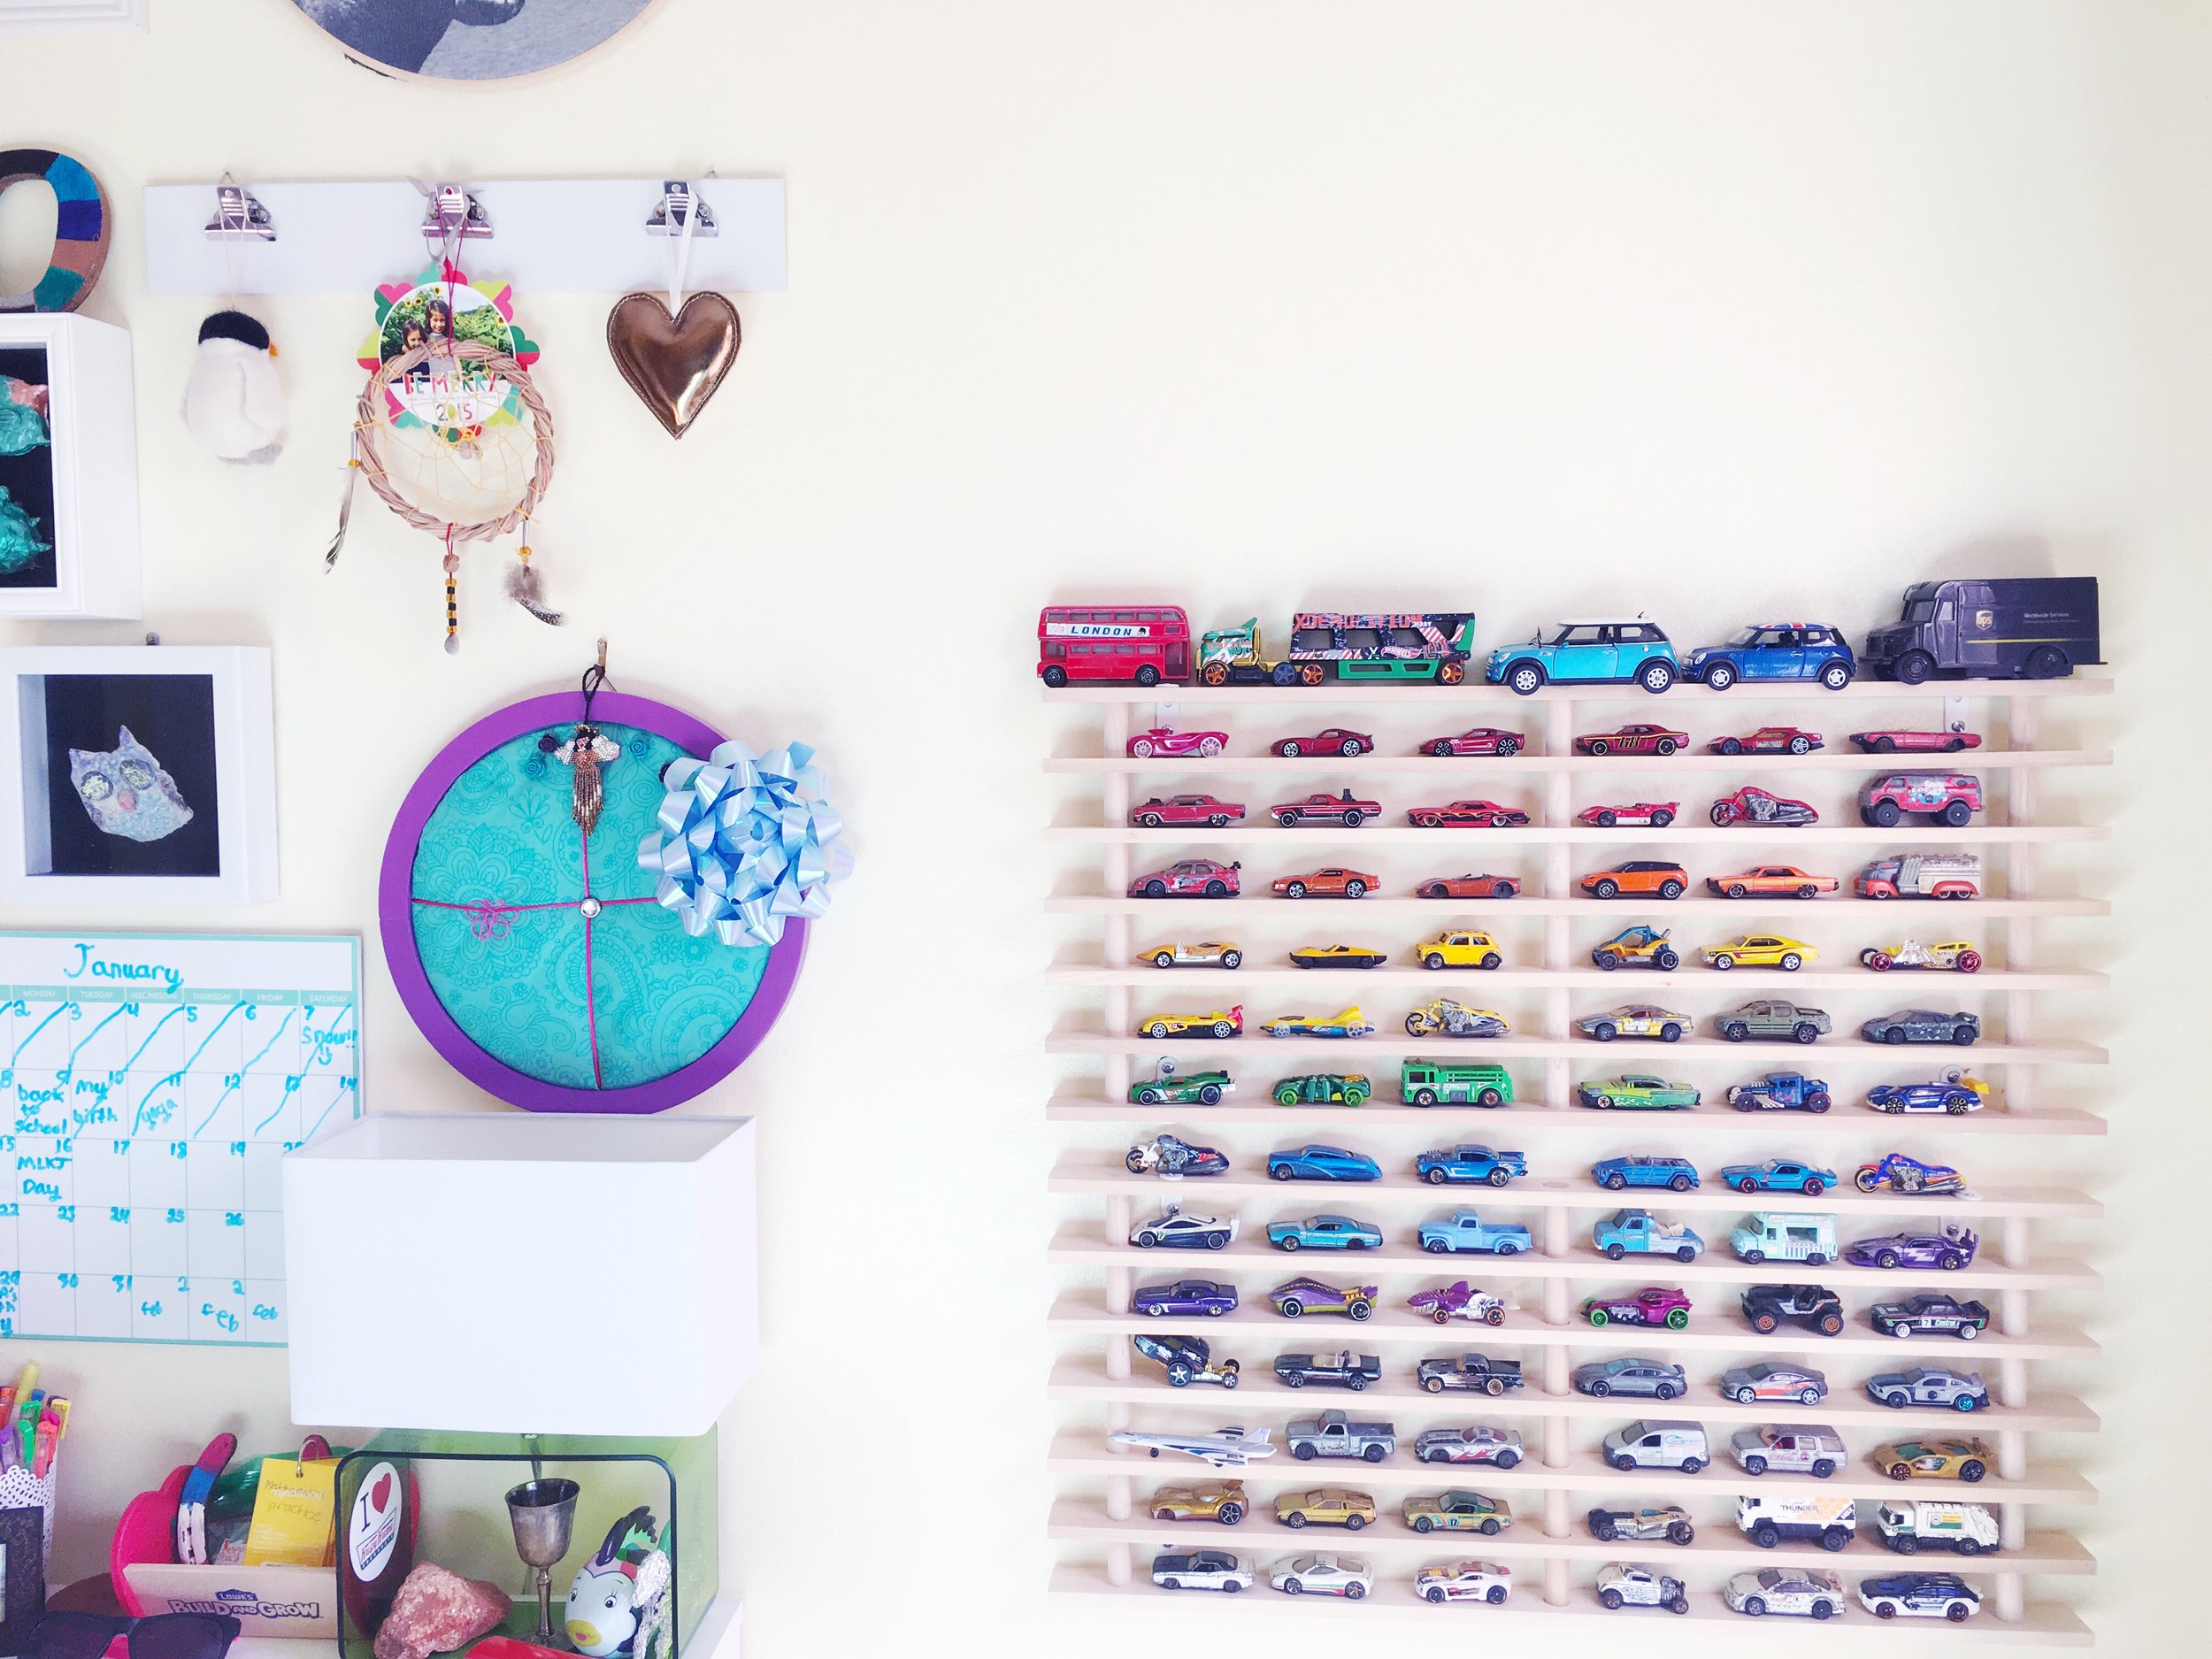 Mum reveals how she stores son's toy car collection using £6 magnetic strips  - and now he 'loves tidying them away' himself